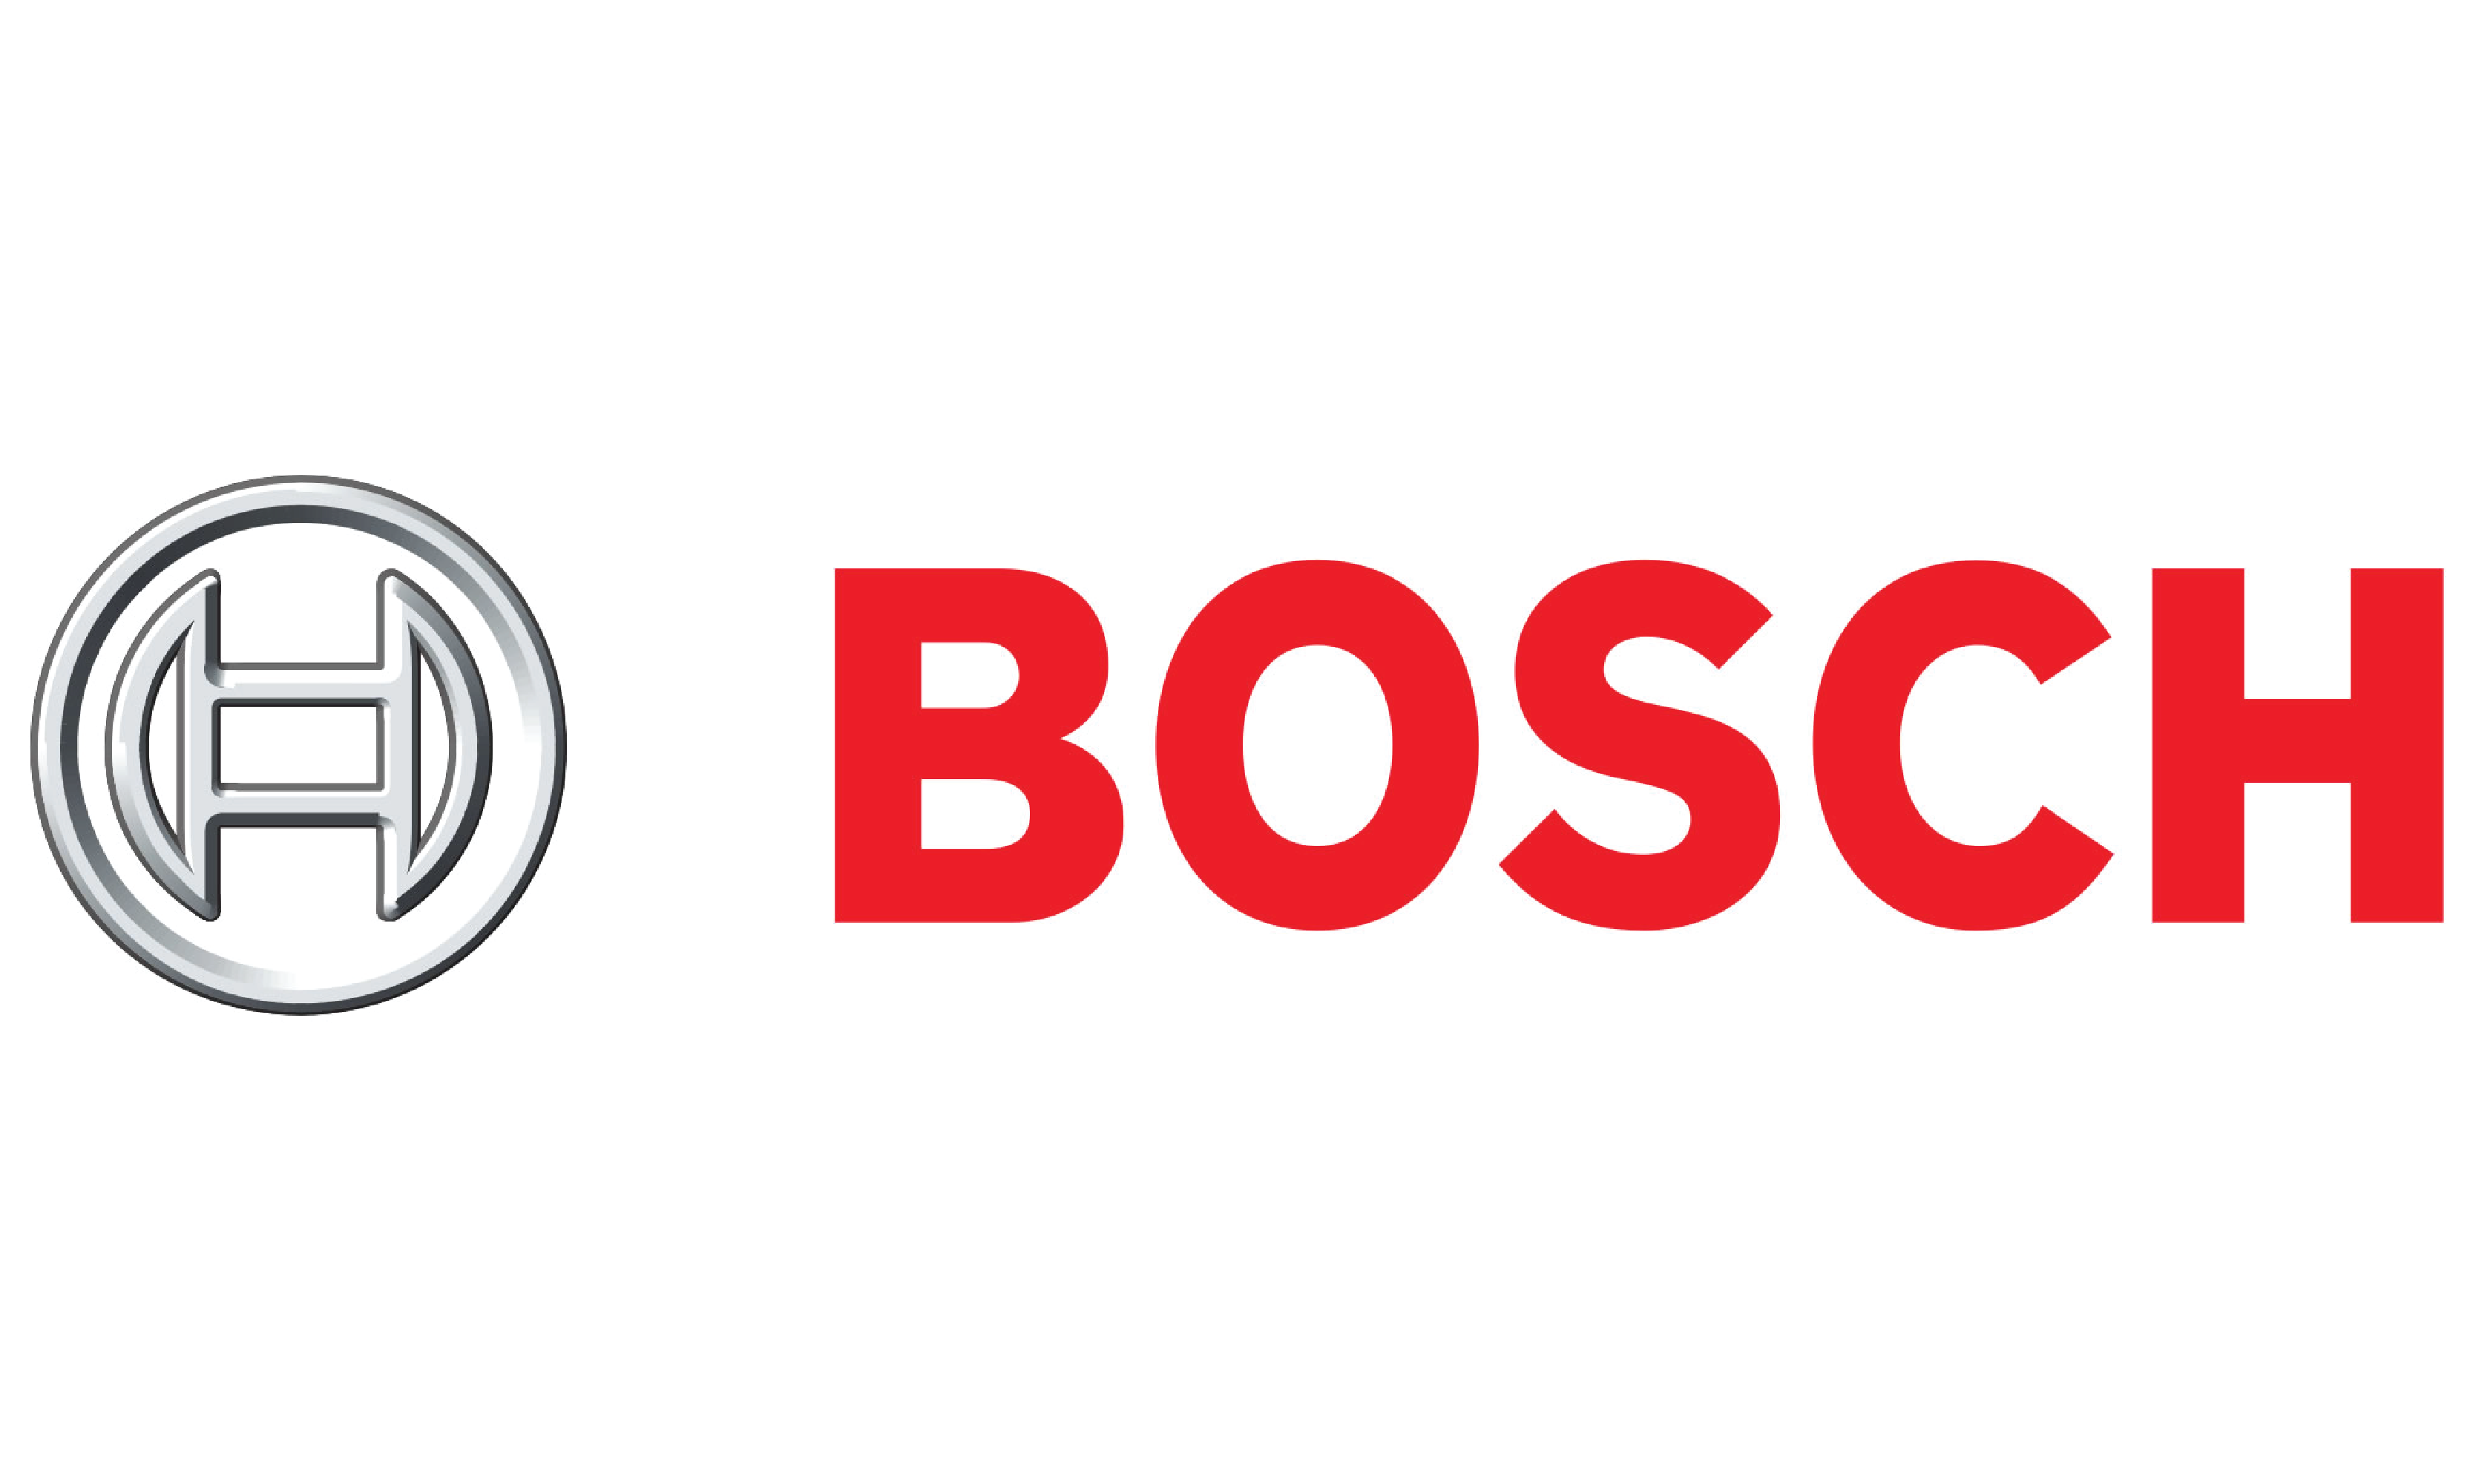 Logo Bosch Png - Start The New Year With A New Career At Robert Bosch, Llc In Charleston, Sc!, Transparent background PNG HD thumbnail